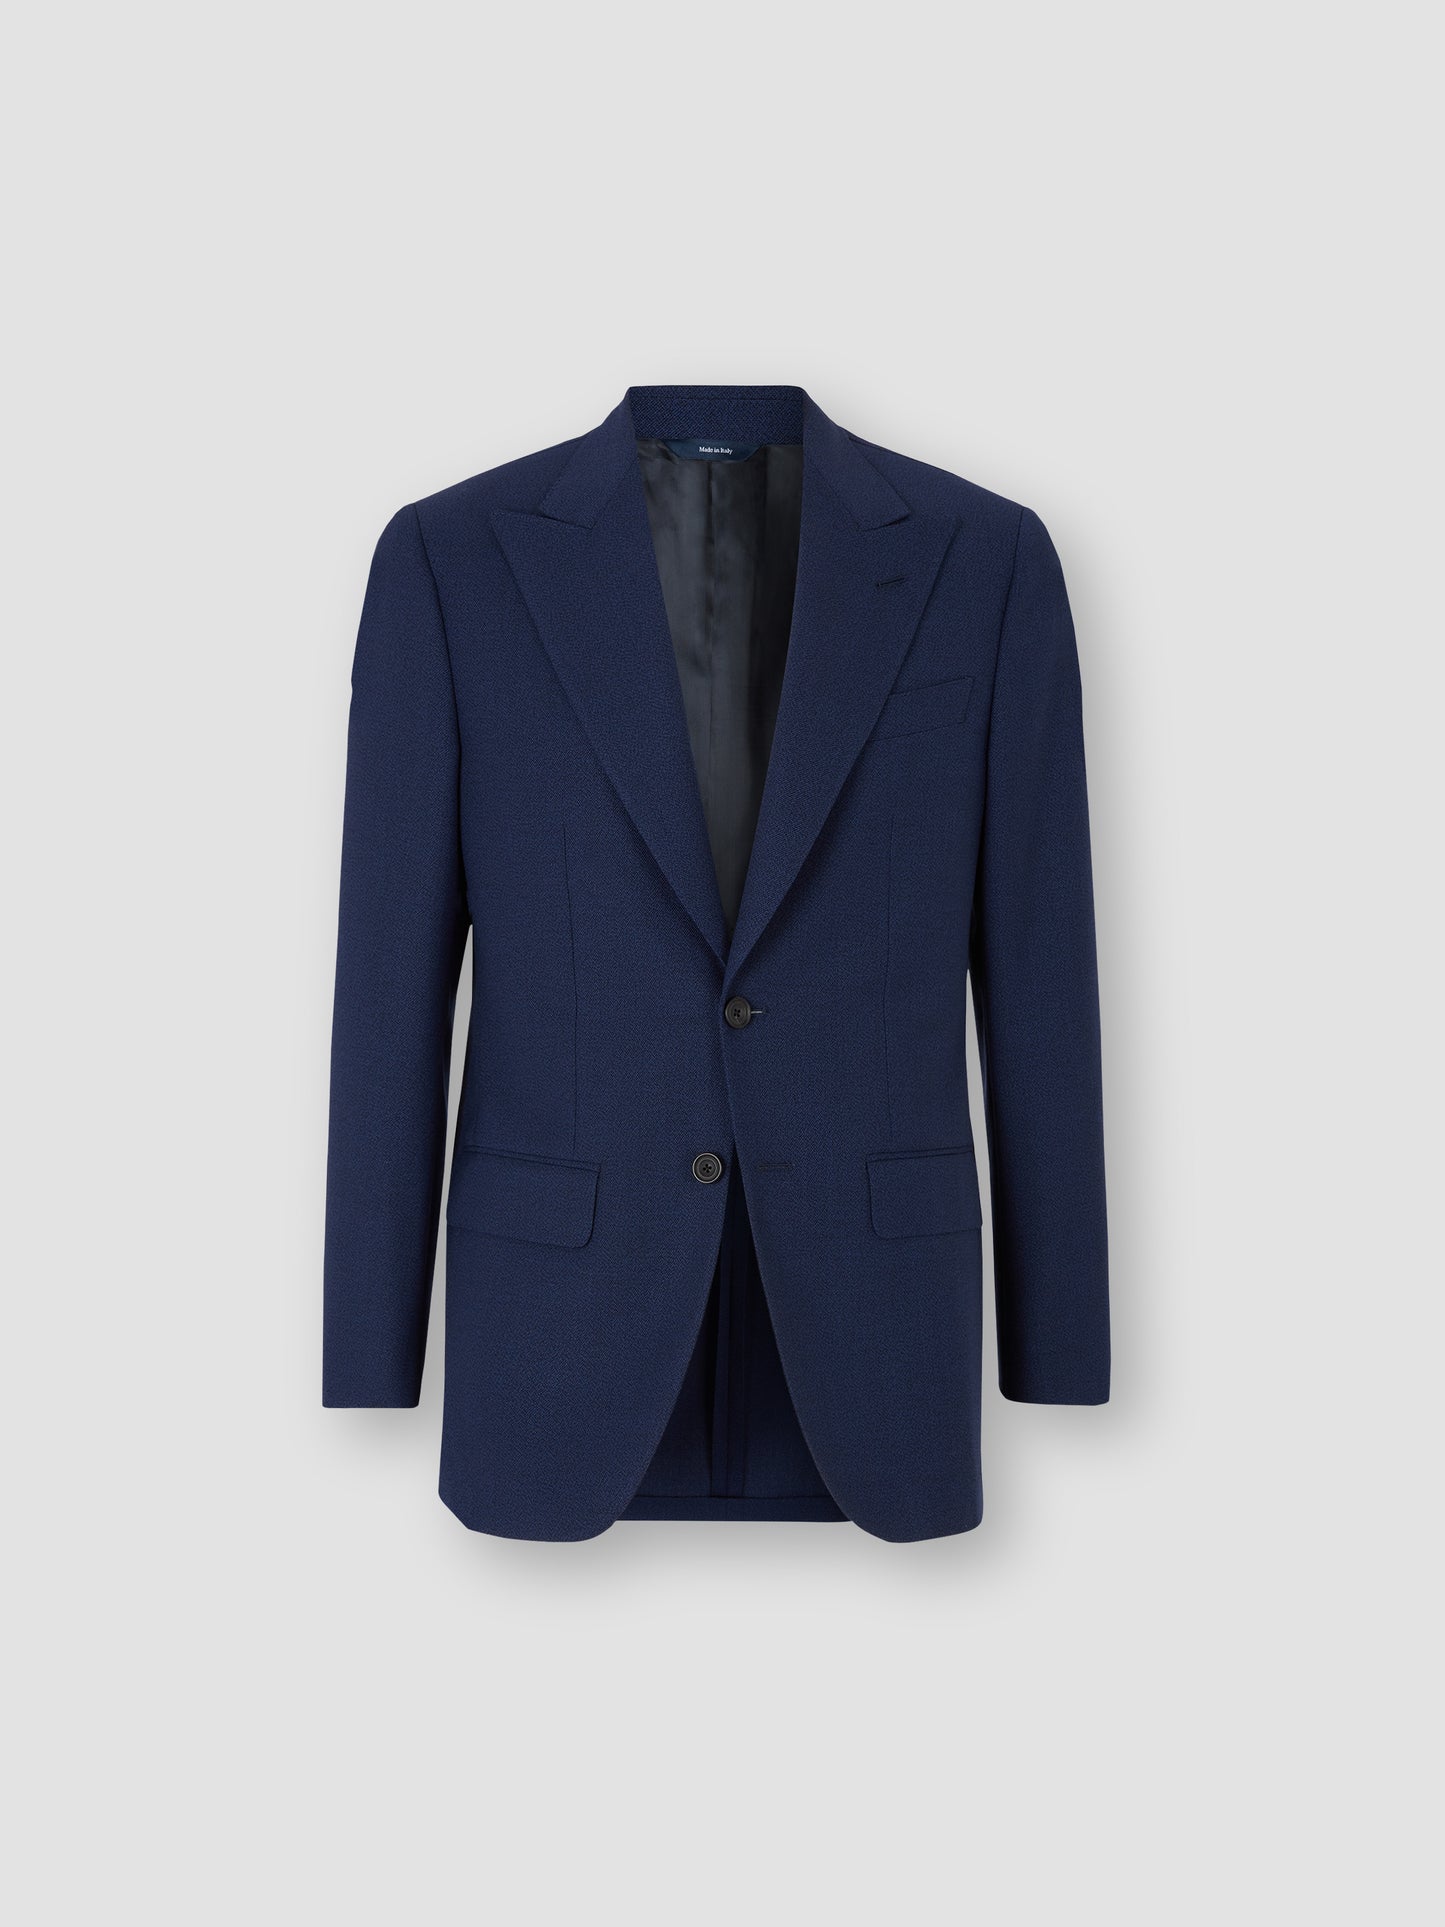 Single Breasted Wool Peak Lapel Suit French Navy Product